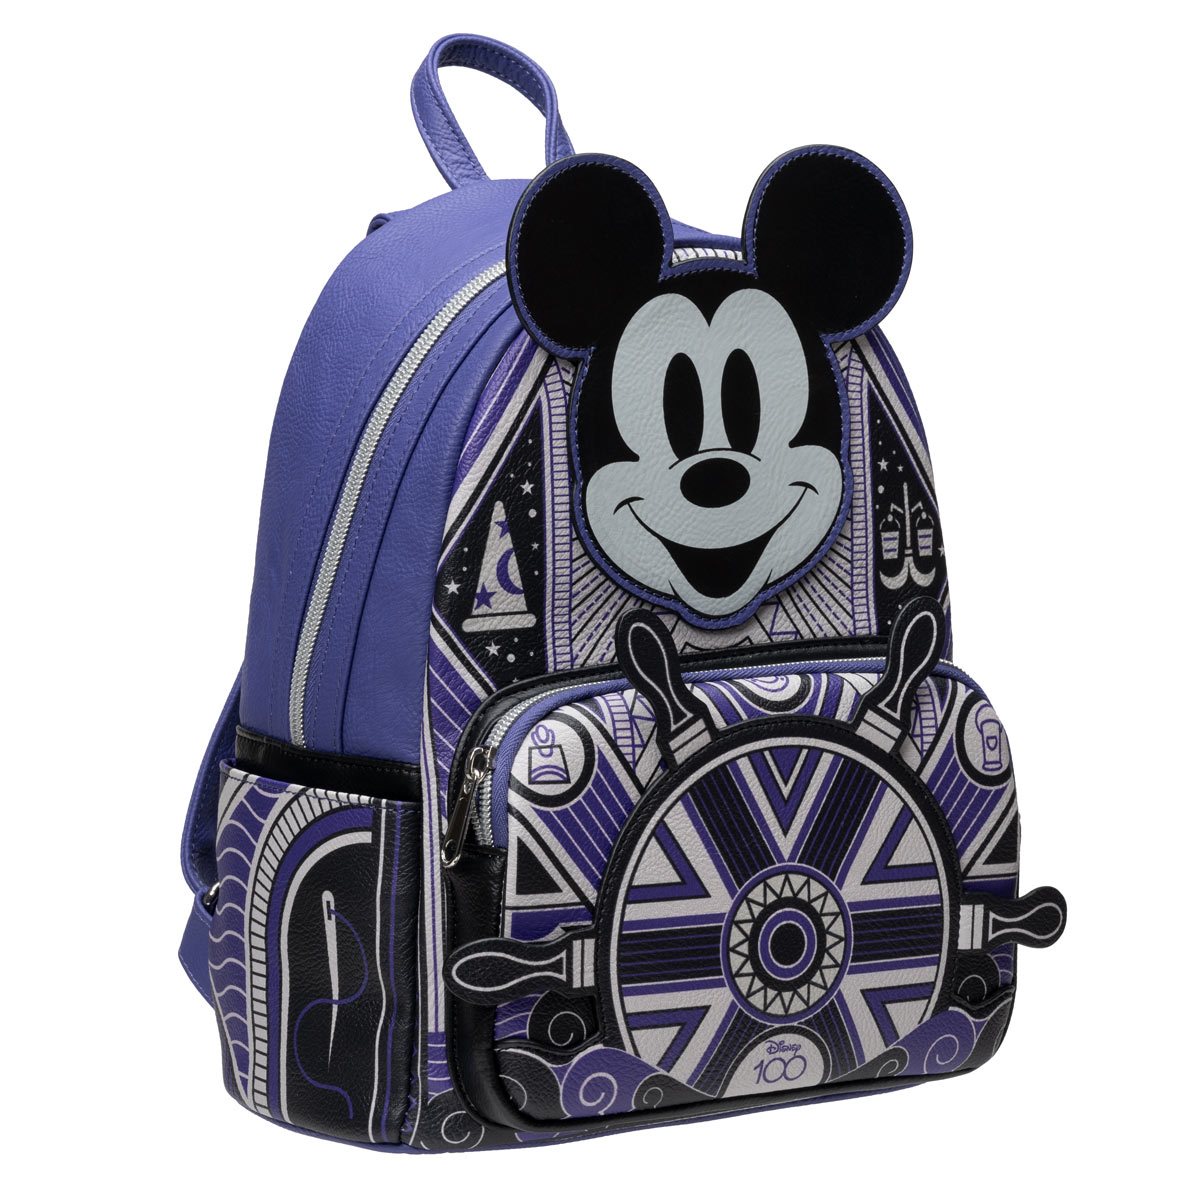 Disney's Mickey Mouse Mini Backpack